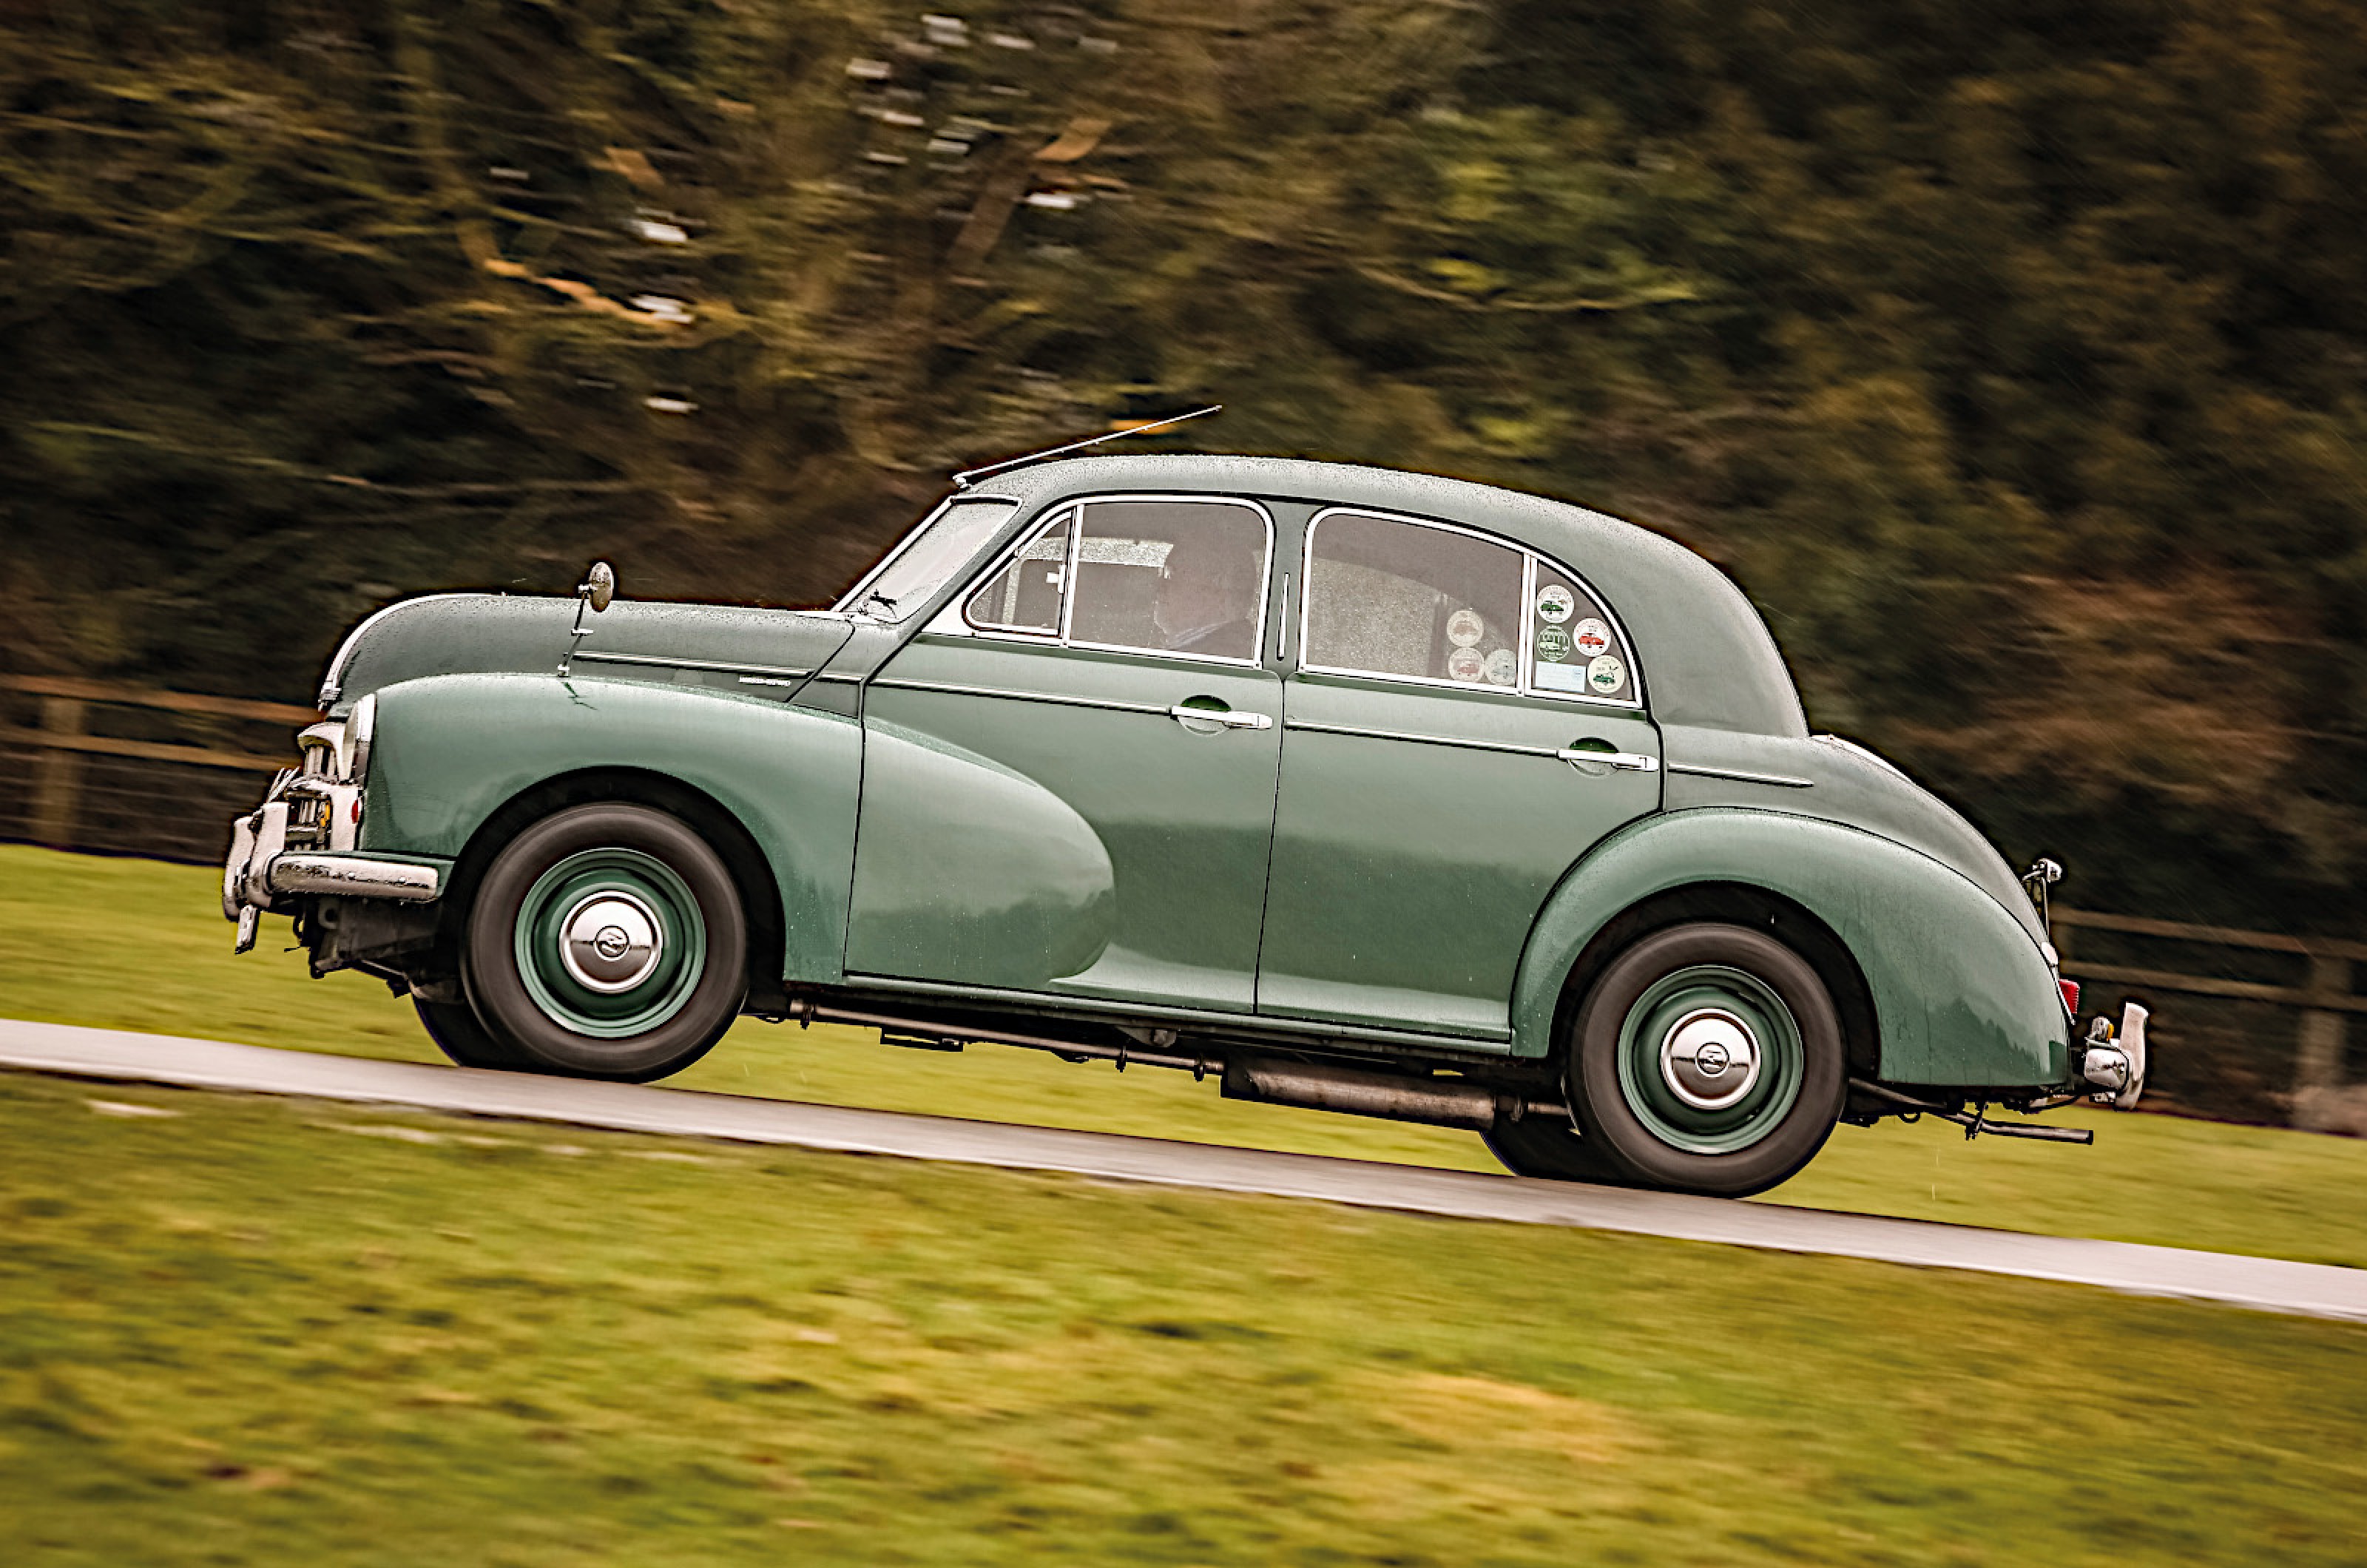 <p>Morris used Oxford as a model name more or less continuously from 1913 to 1971.</p>  <p>The generation produced from 1948 to 1954 was the first with unibody construction, and following contemporary fashion its design had a lot in common with that of the Chevrolet Fleetline, and indeed the Renault 4CV.</p>  <p>Unlike the Renault, the Oxford was front-engined, so it had a real radiator grille which, thanks to liberal use of chrome, added to the American-style look.</p>  <p>By the mid 1950s, that look had become old-fashioned, and the next Oxford, with a now-trendy straight-sided ponton body, had very little visual connection with the car it replaced.</p>